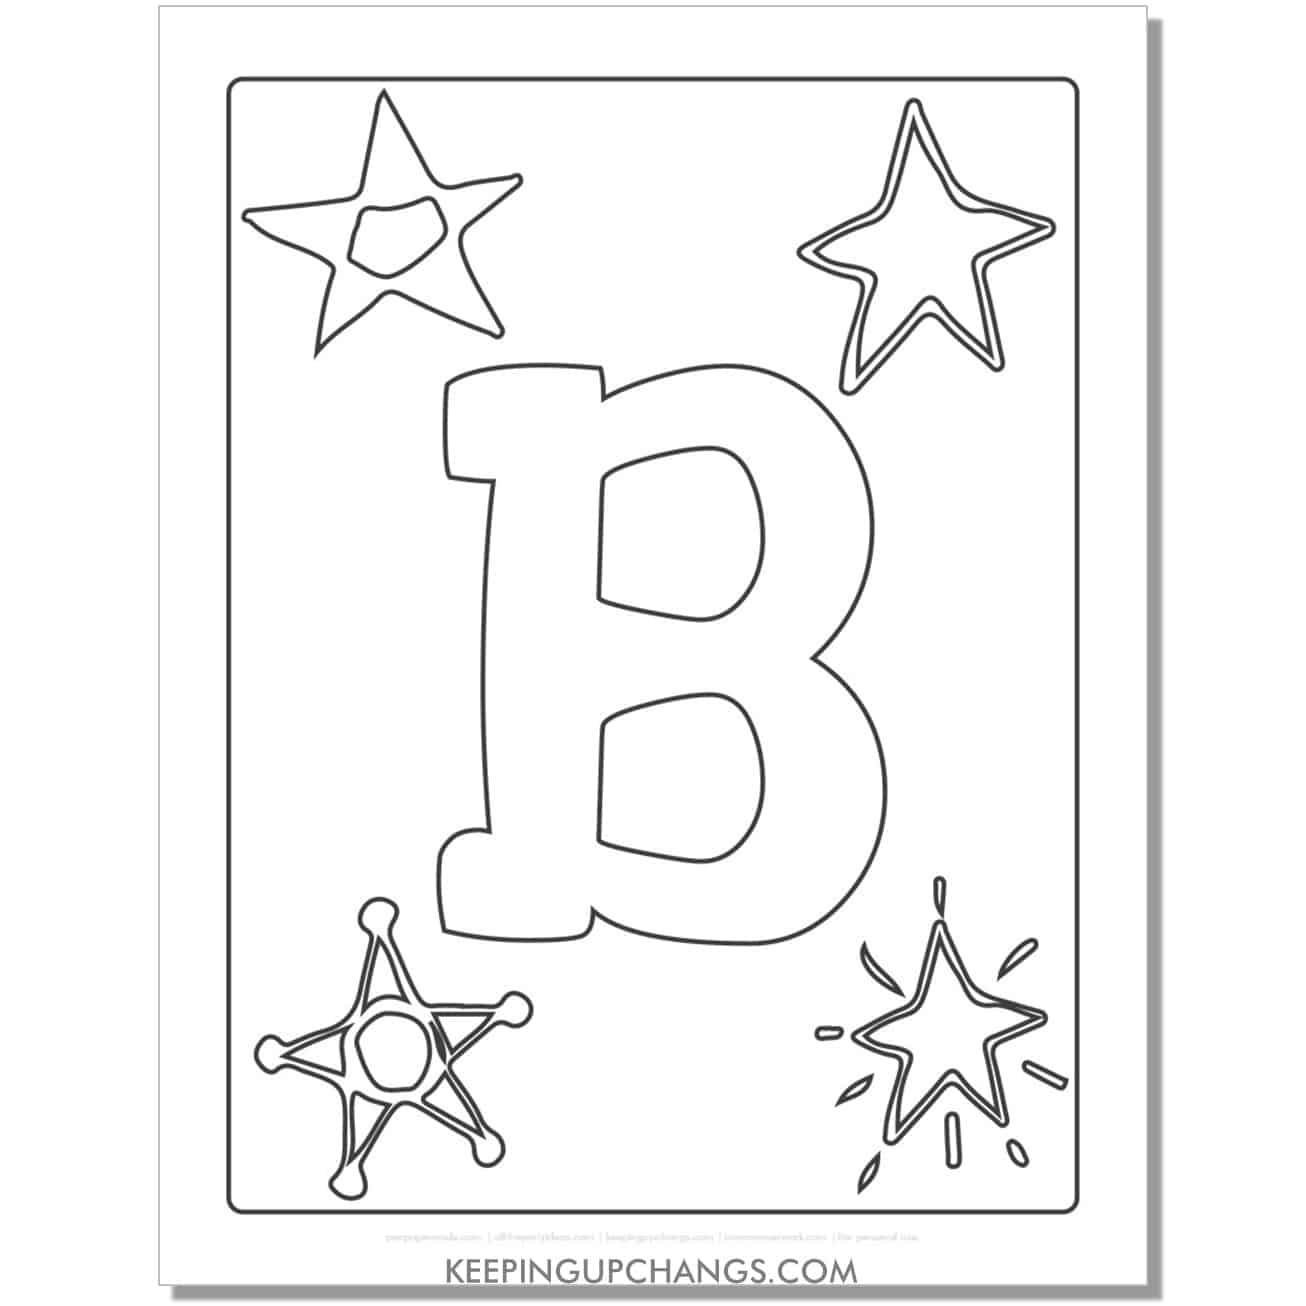 cool letter b to color with stars, space theme.